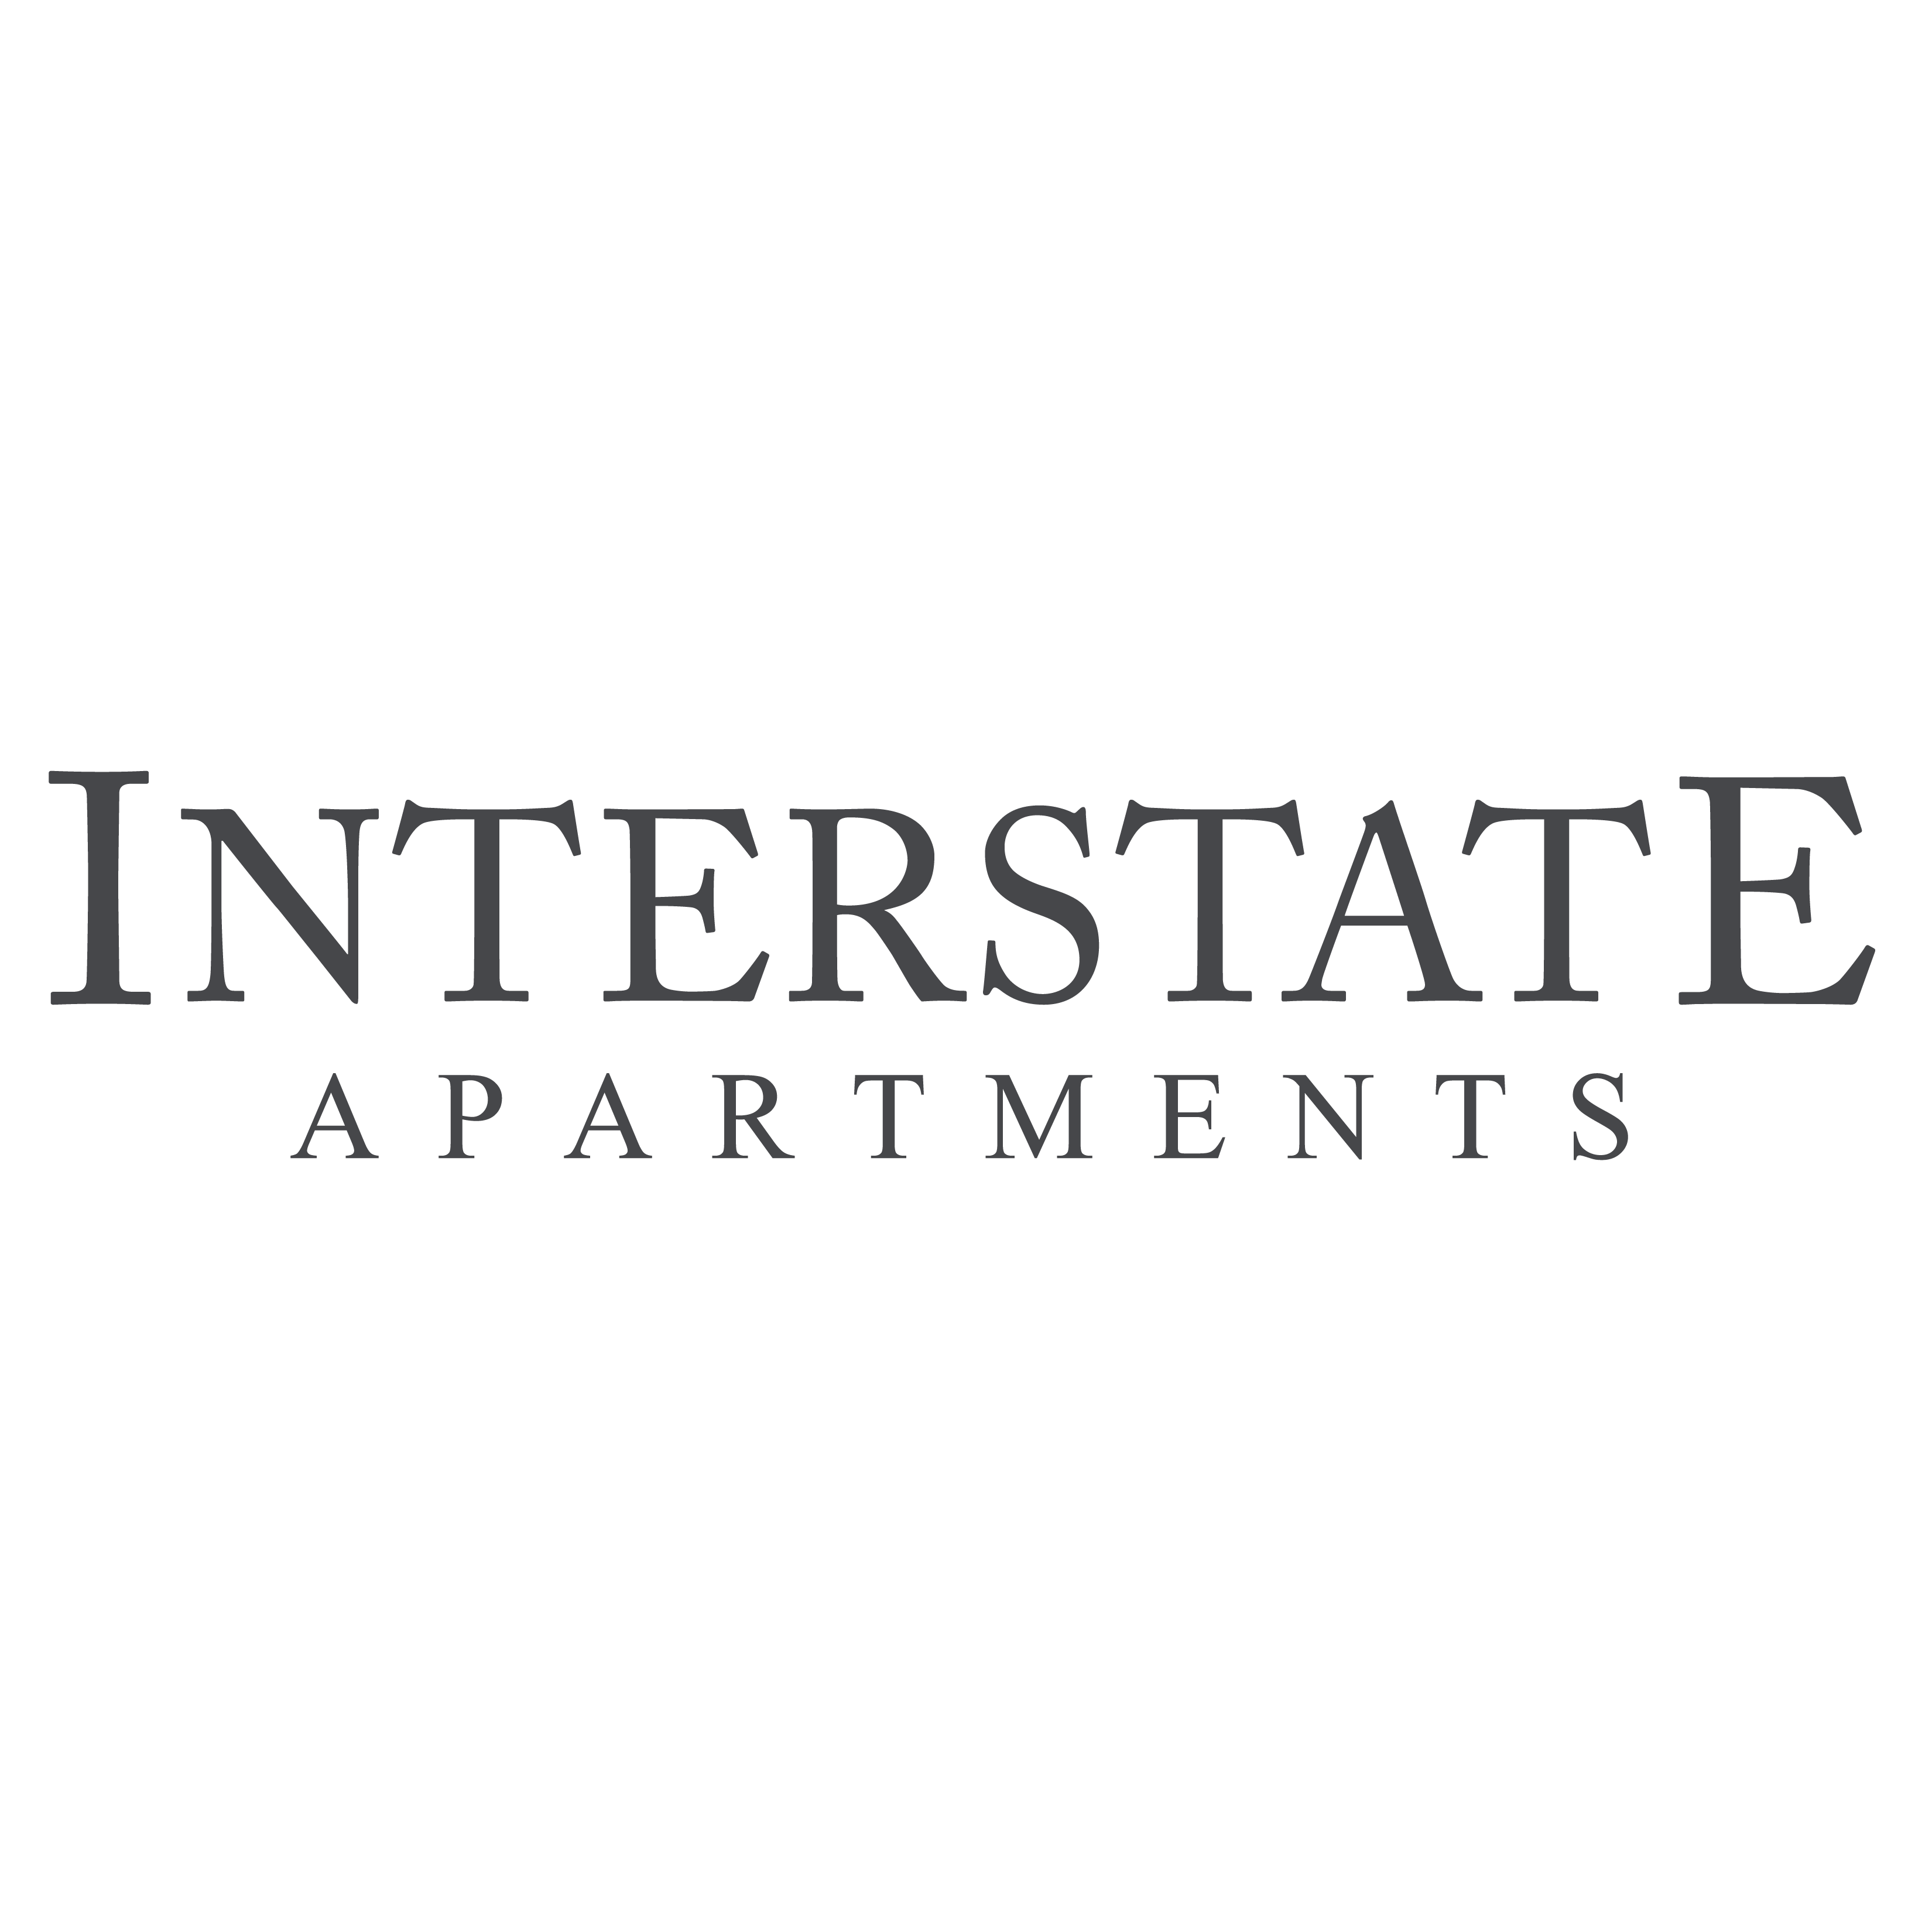 Interstate Apartments